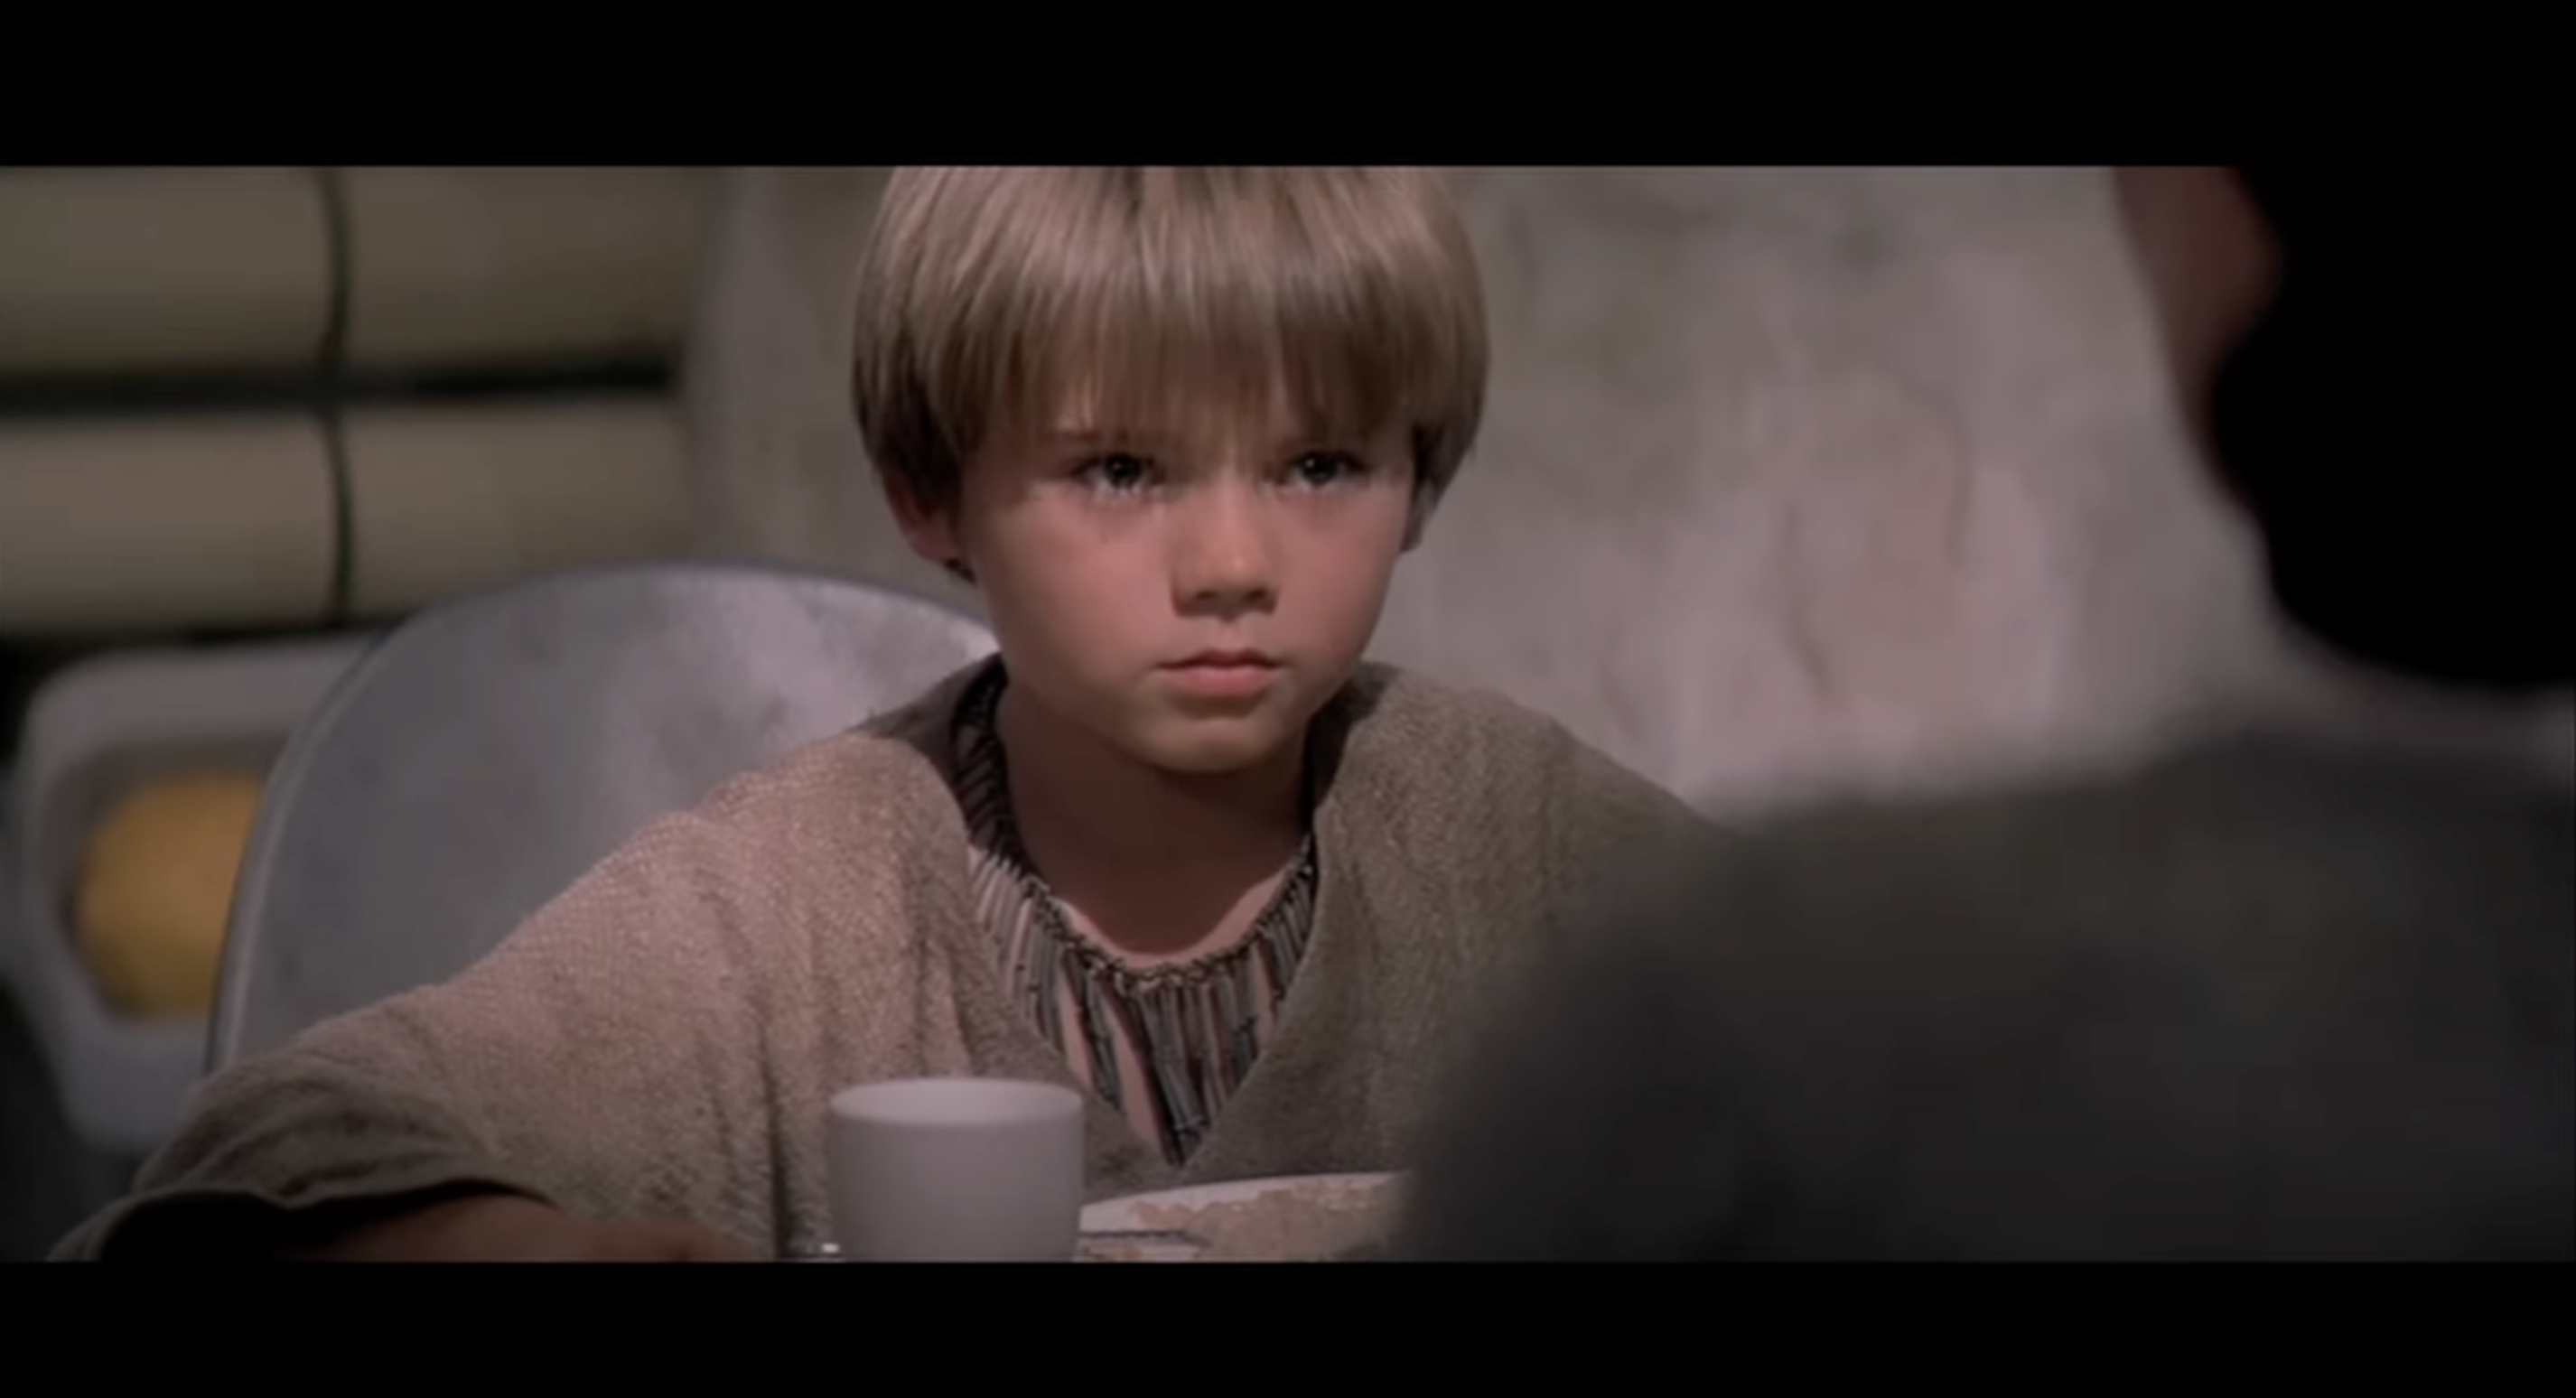 Jake Lloyd as young Anakin Skywalker in "Star Wars Episode I: The Phantom Menace," as seen in a video posted July 6, 2012 | Source: YouTube/StarWars